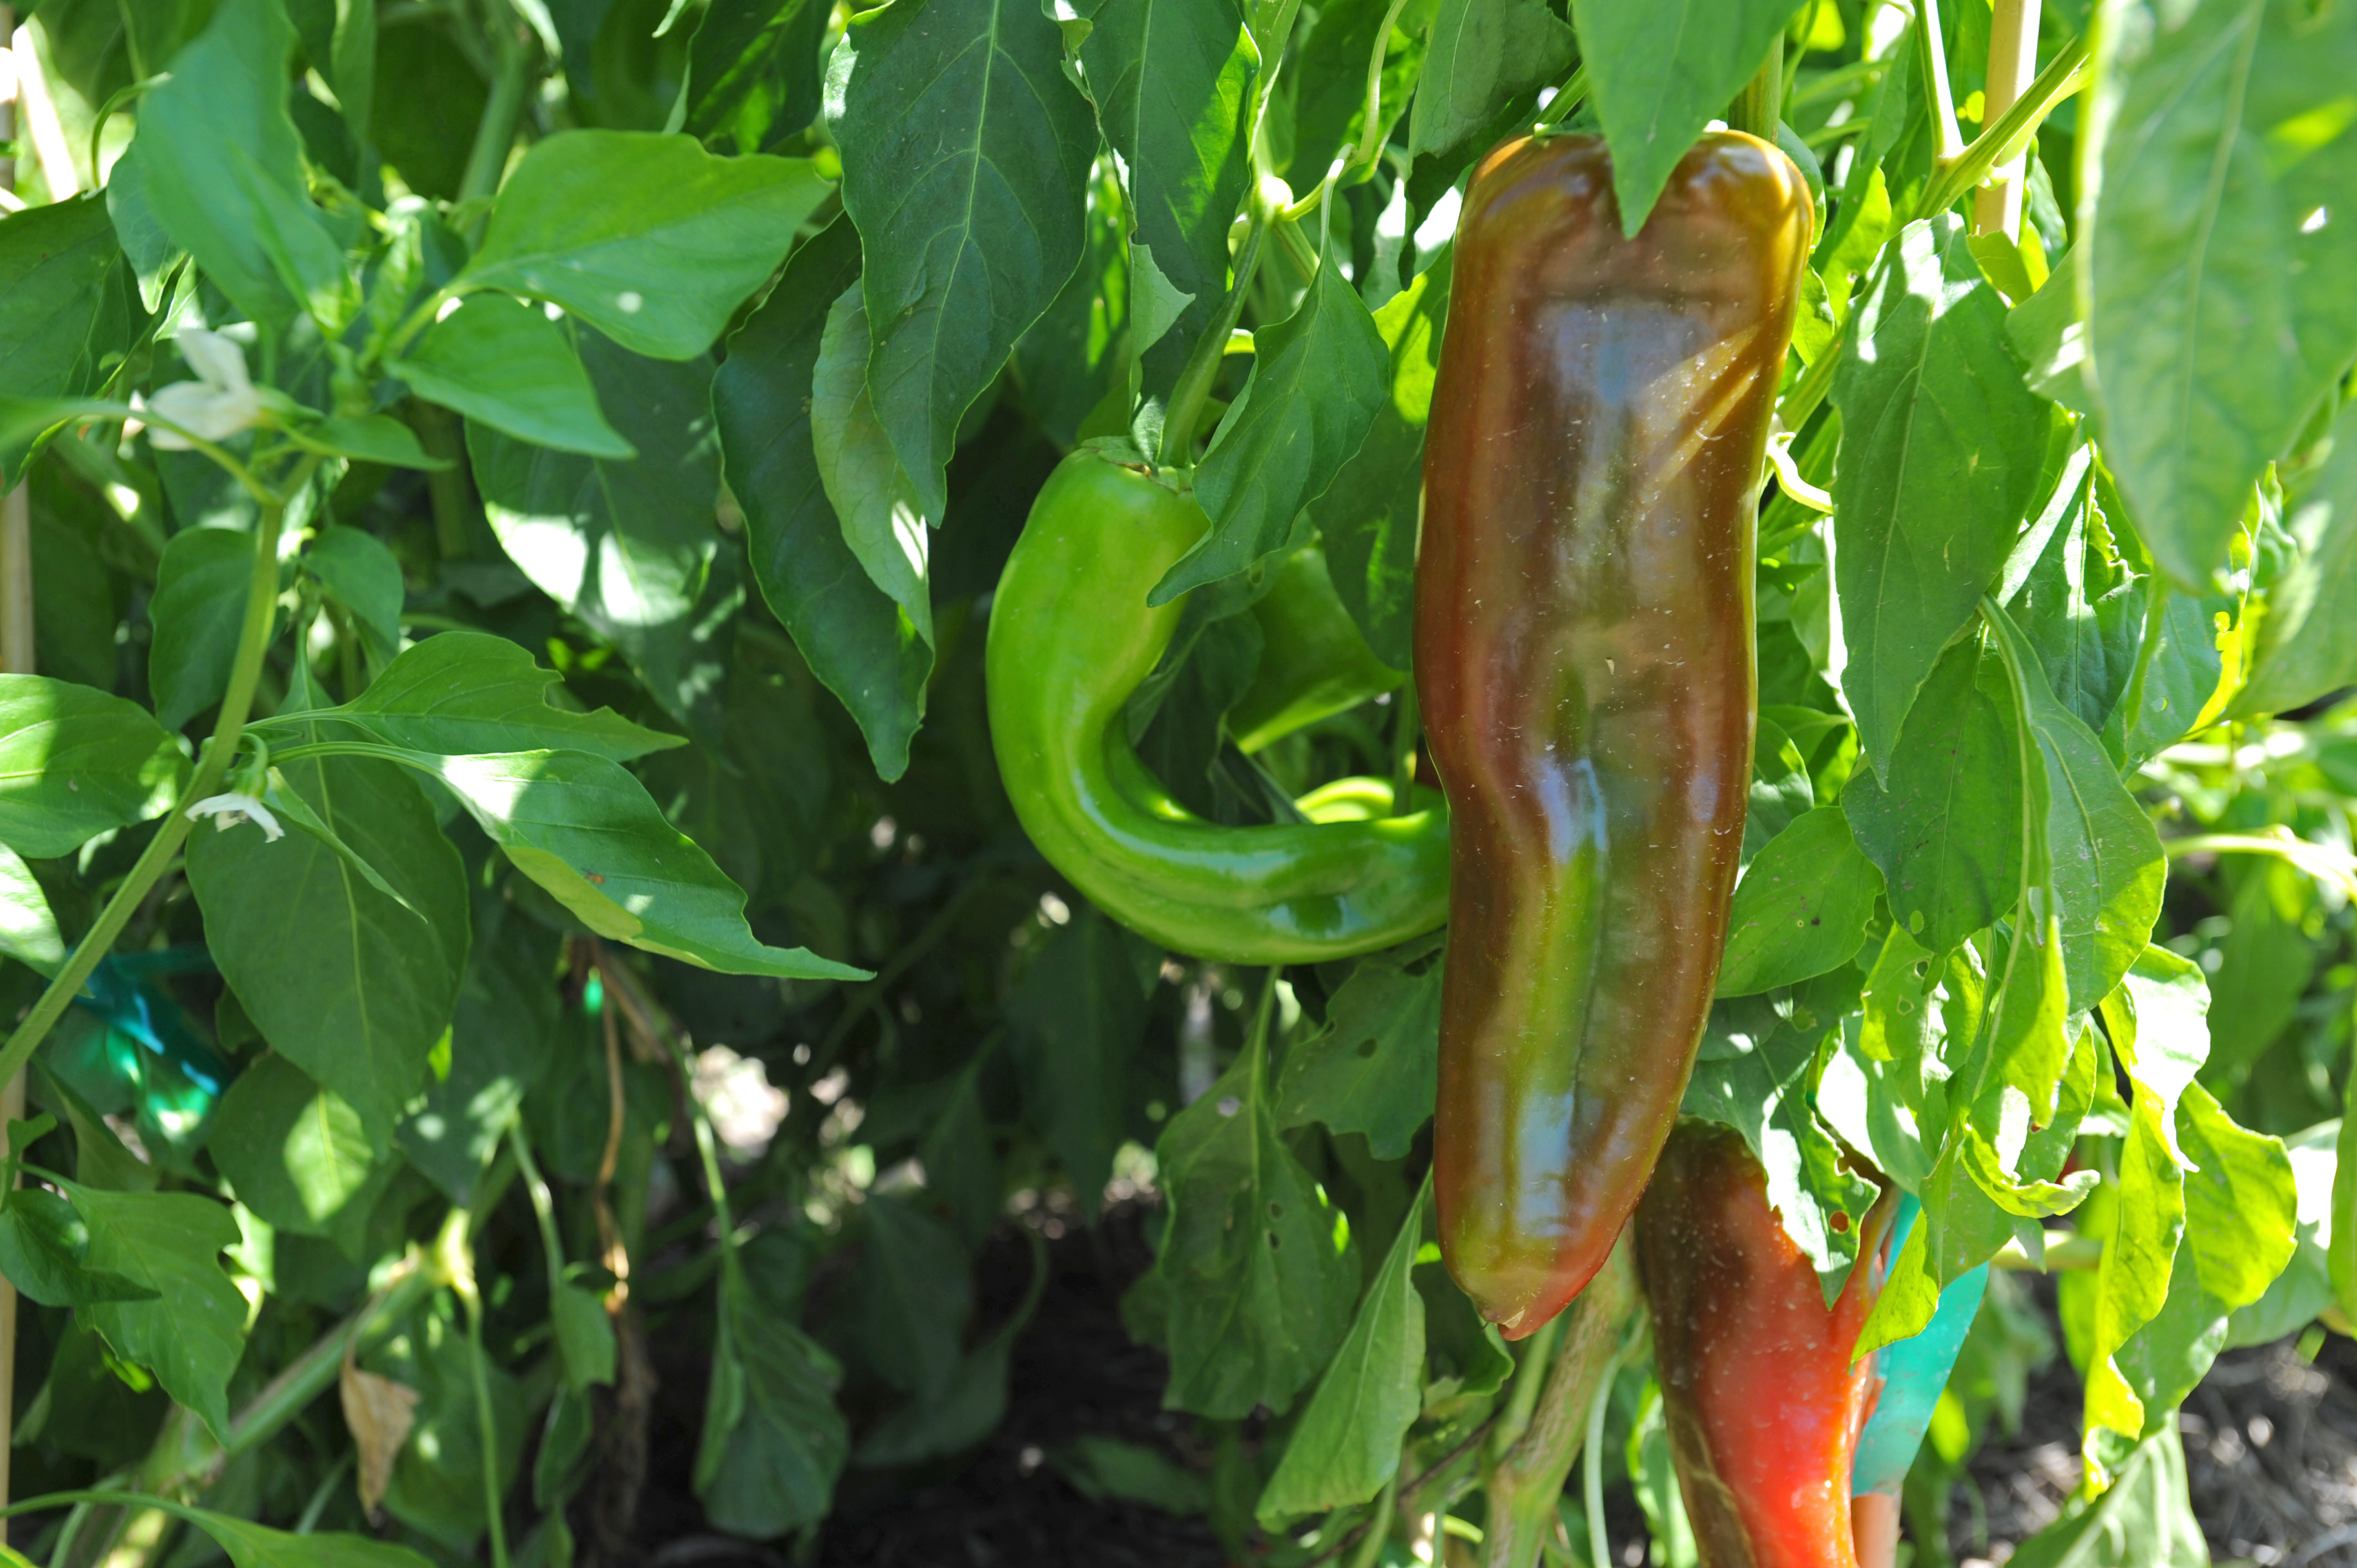 green chile growing on a green stem with 2 chilies turning red.